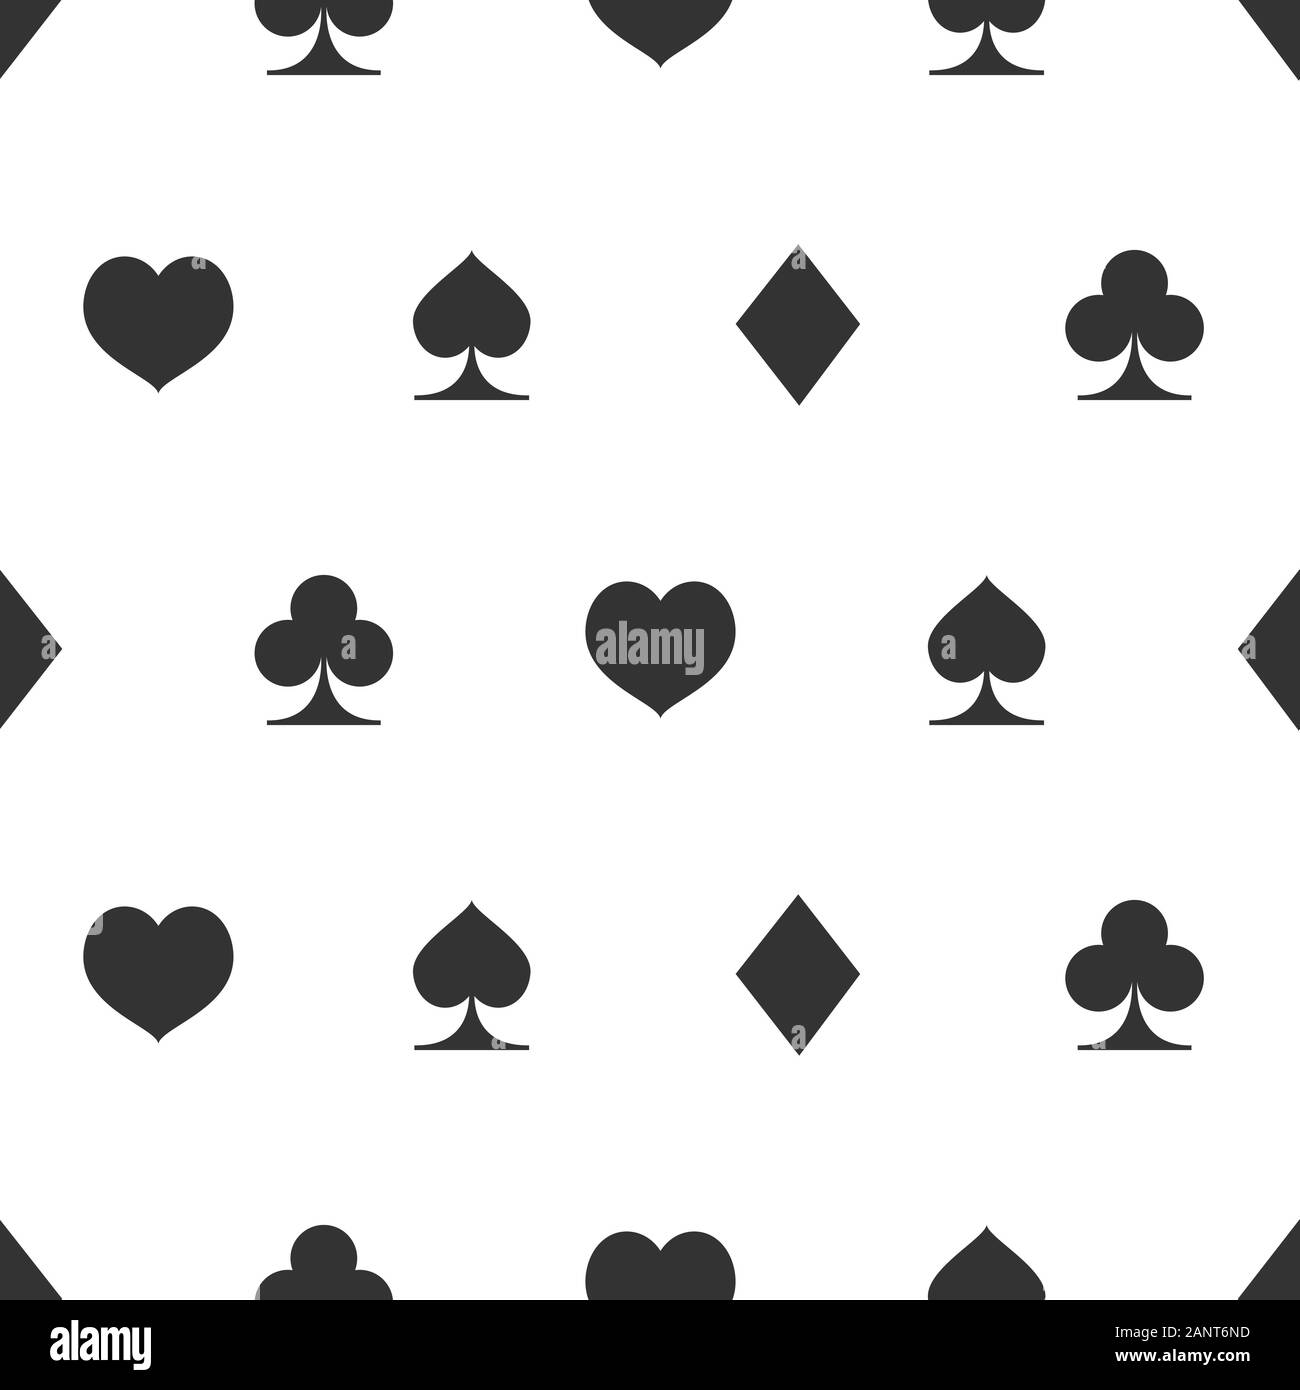 Seamless pattern with suits of playing cards, black and white vector illustration for casino Stock Vector